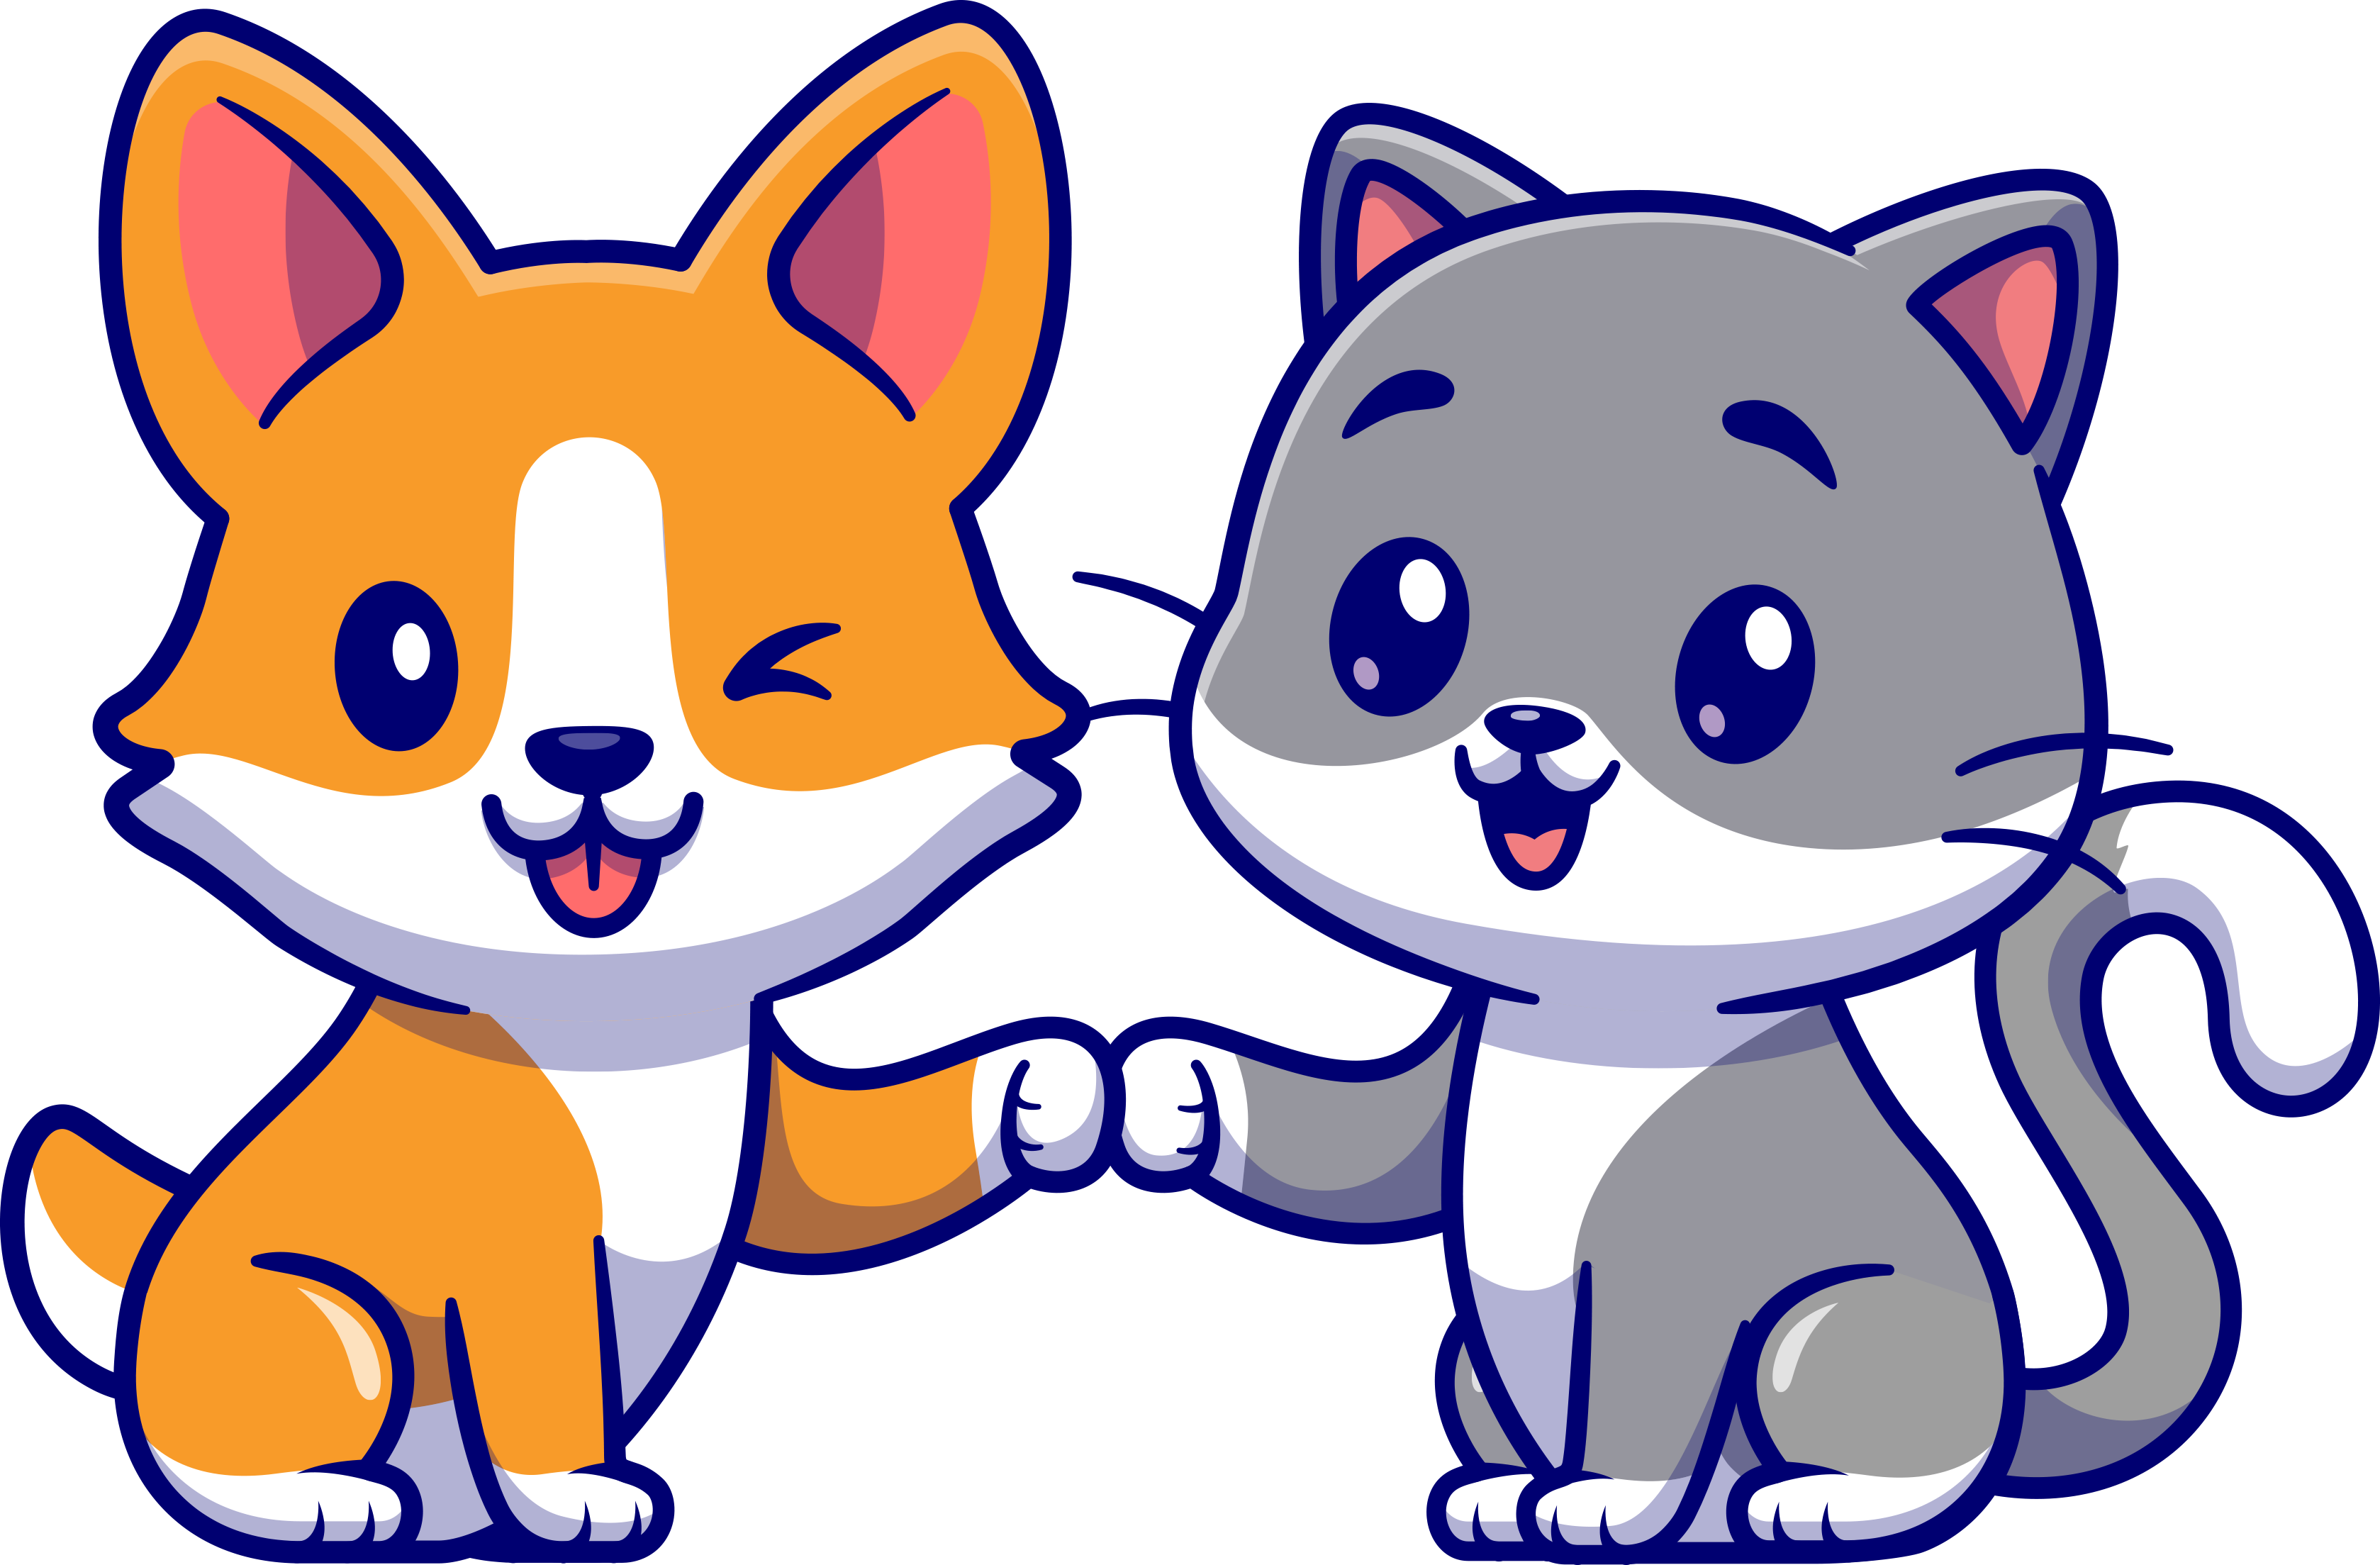 Illustration of a cute corgi and a cute grey and white cat giving each other a fistbump.